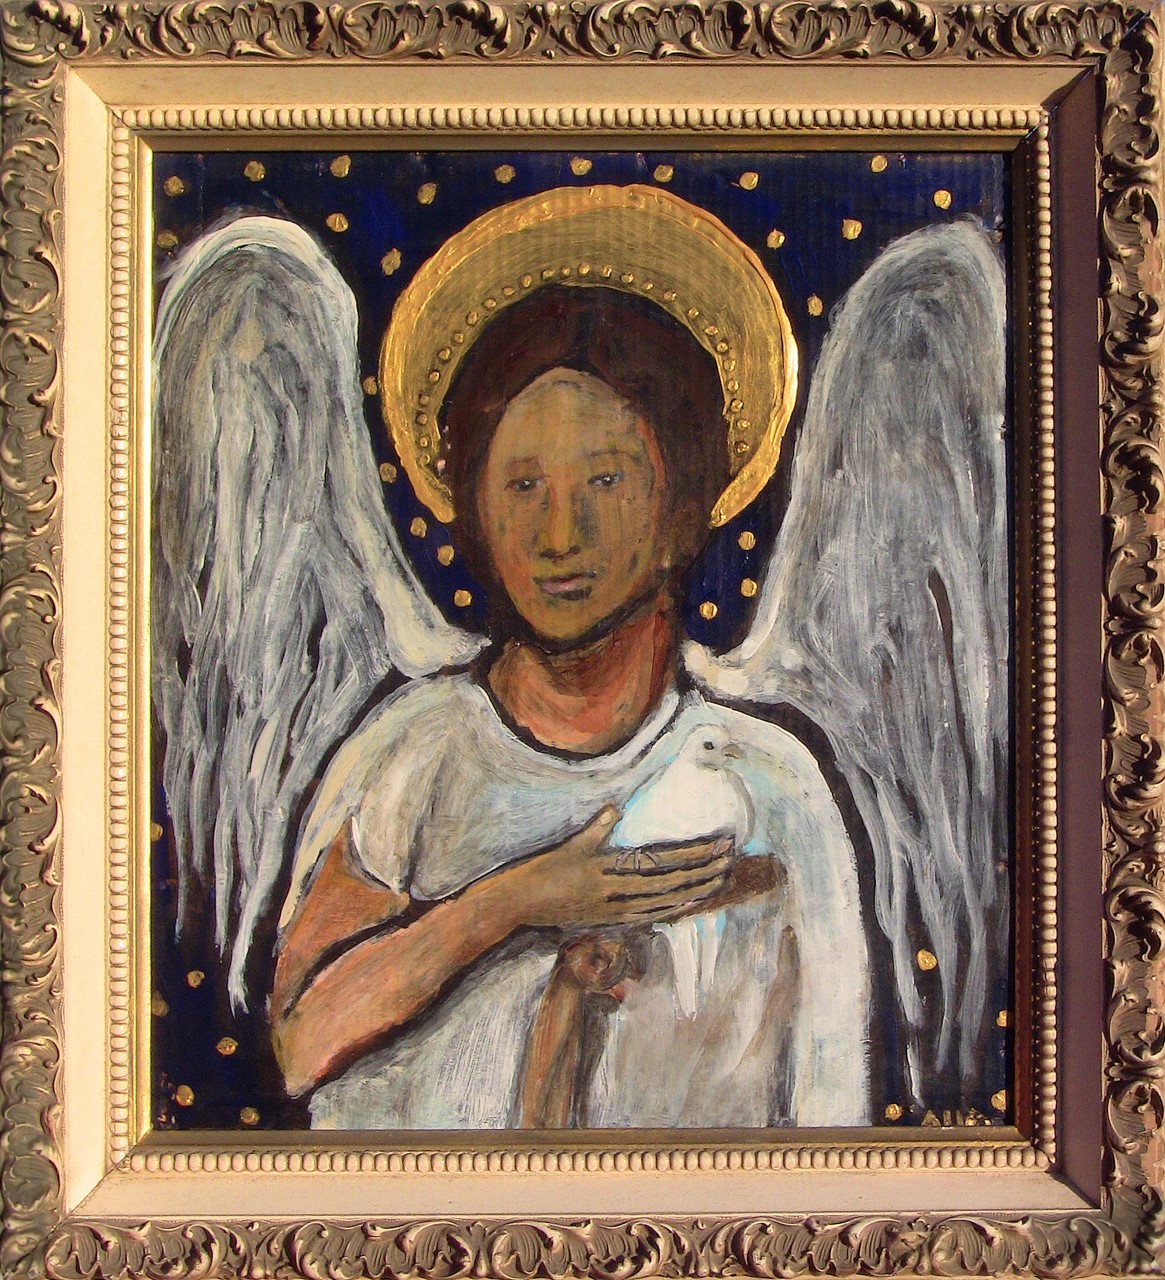 Angel with wings, holding a white dove